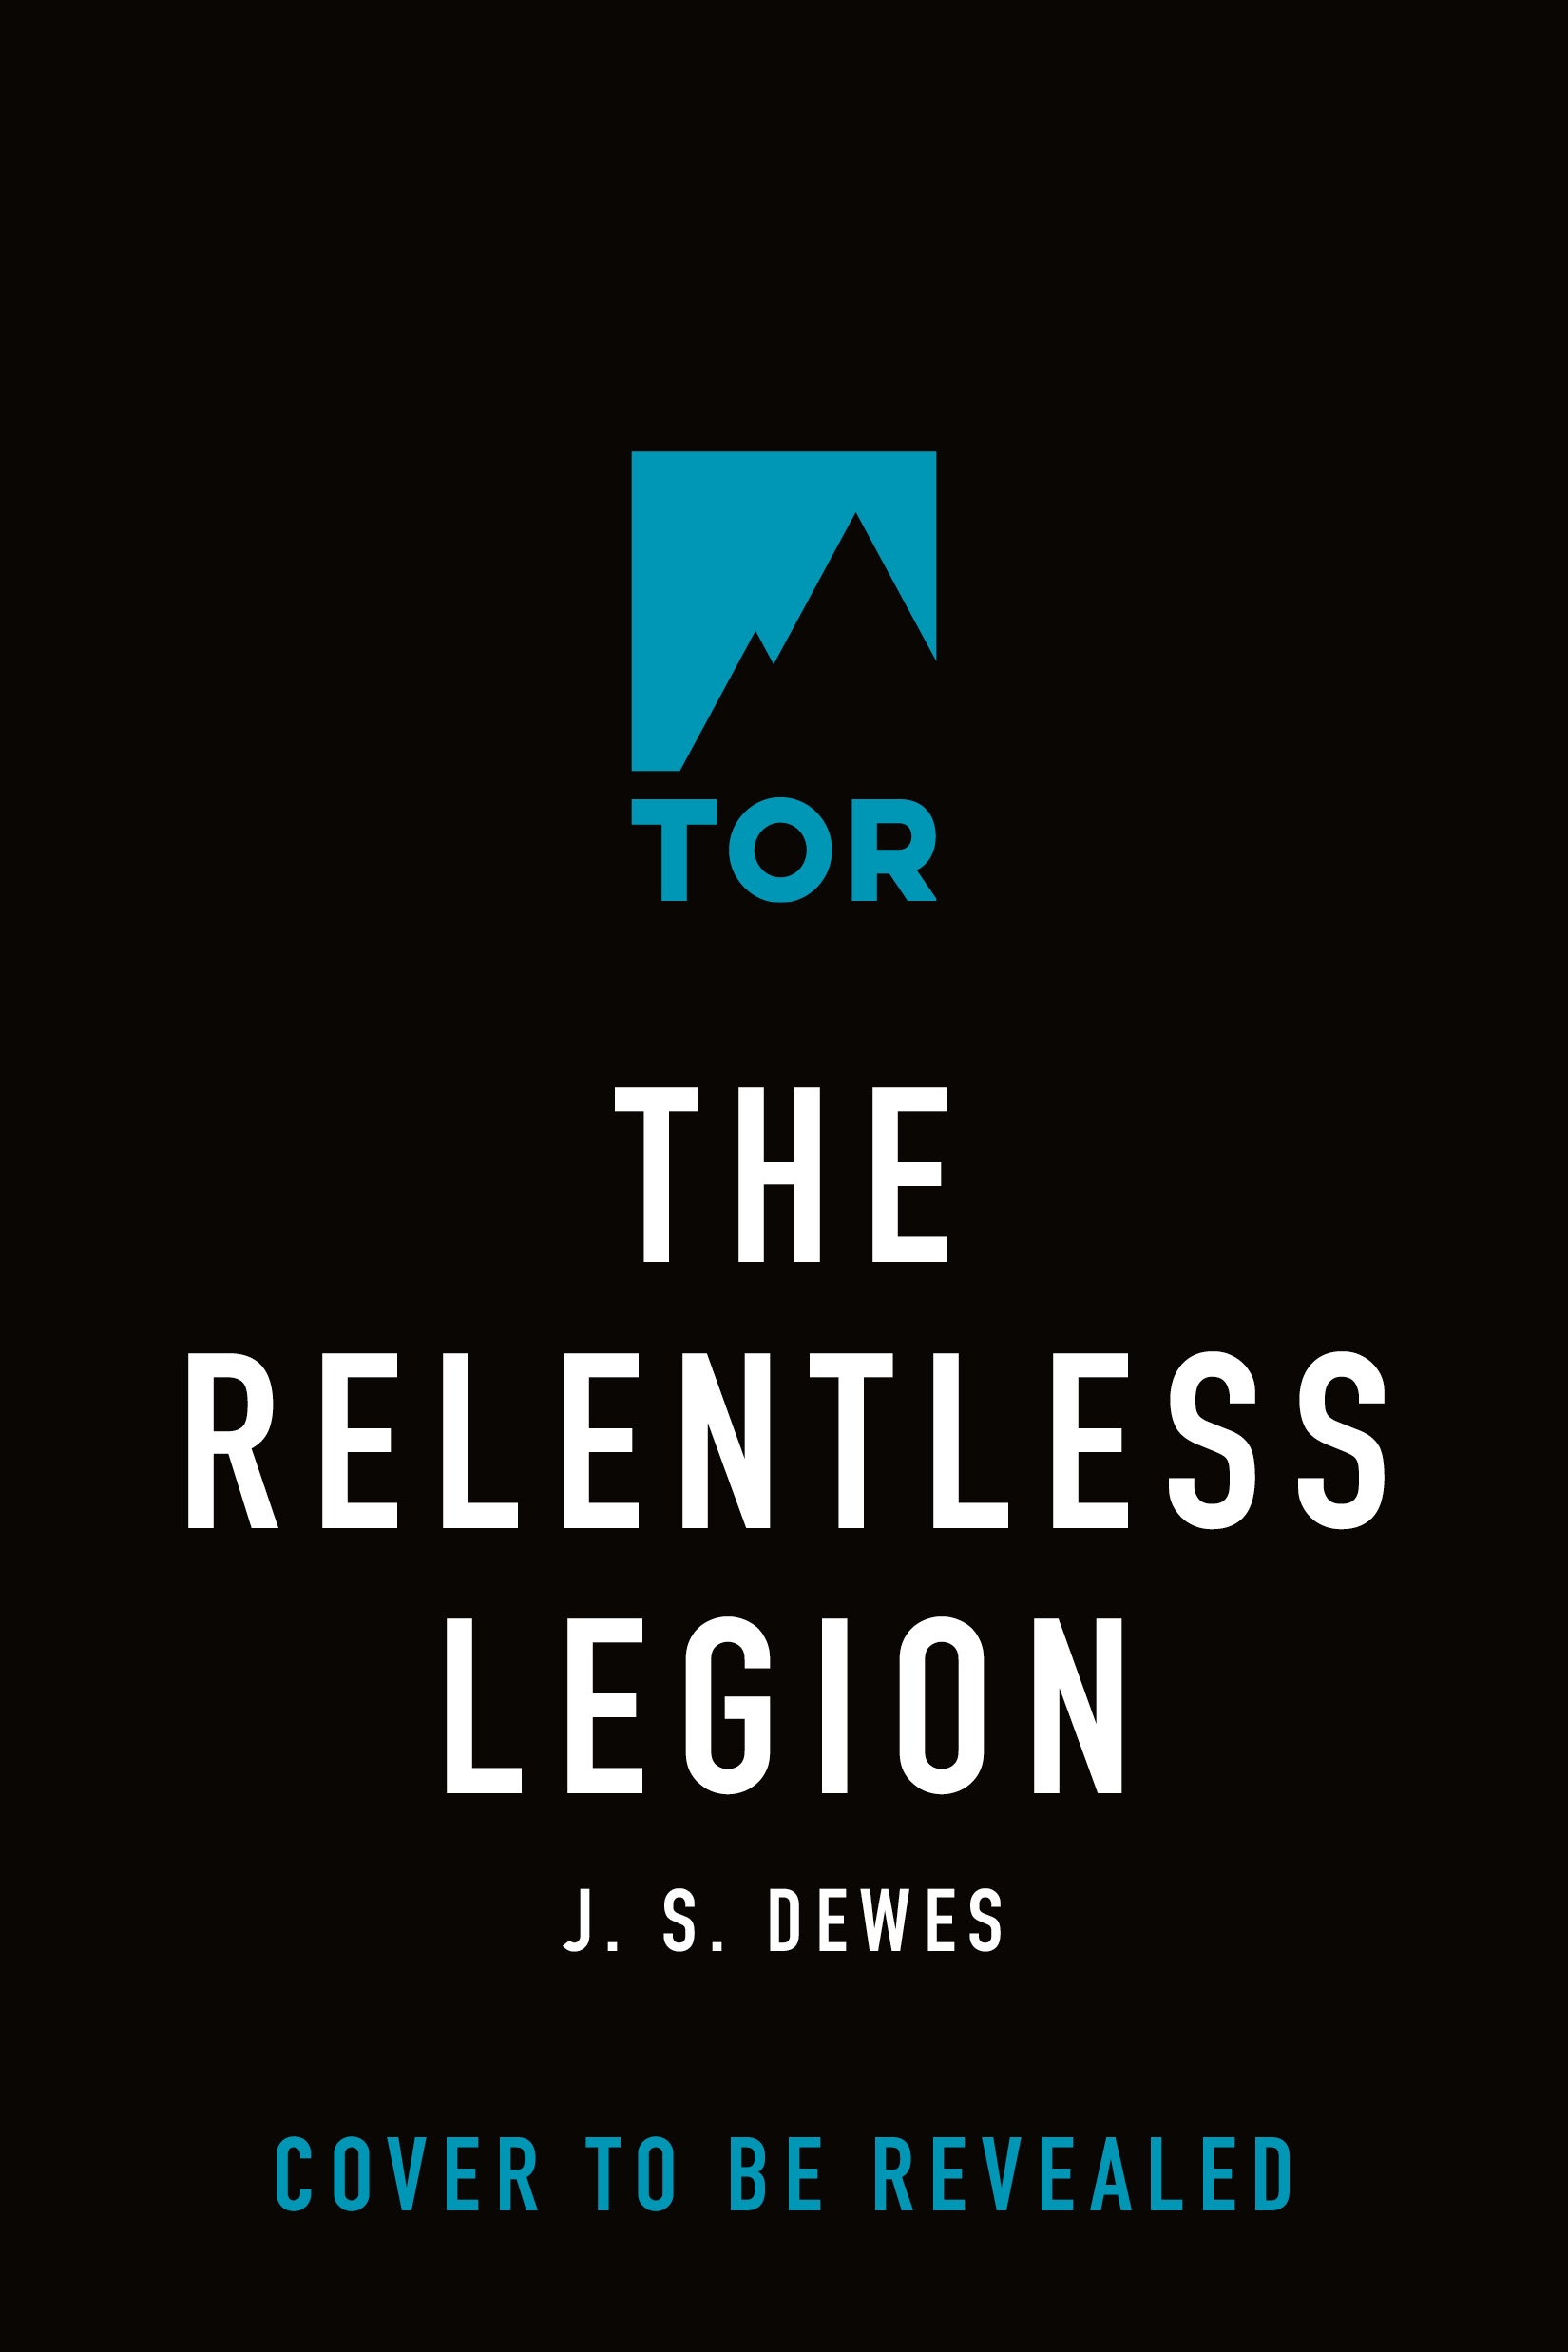 The Relentless Legion by J. S. Dewes